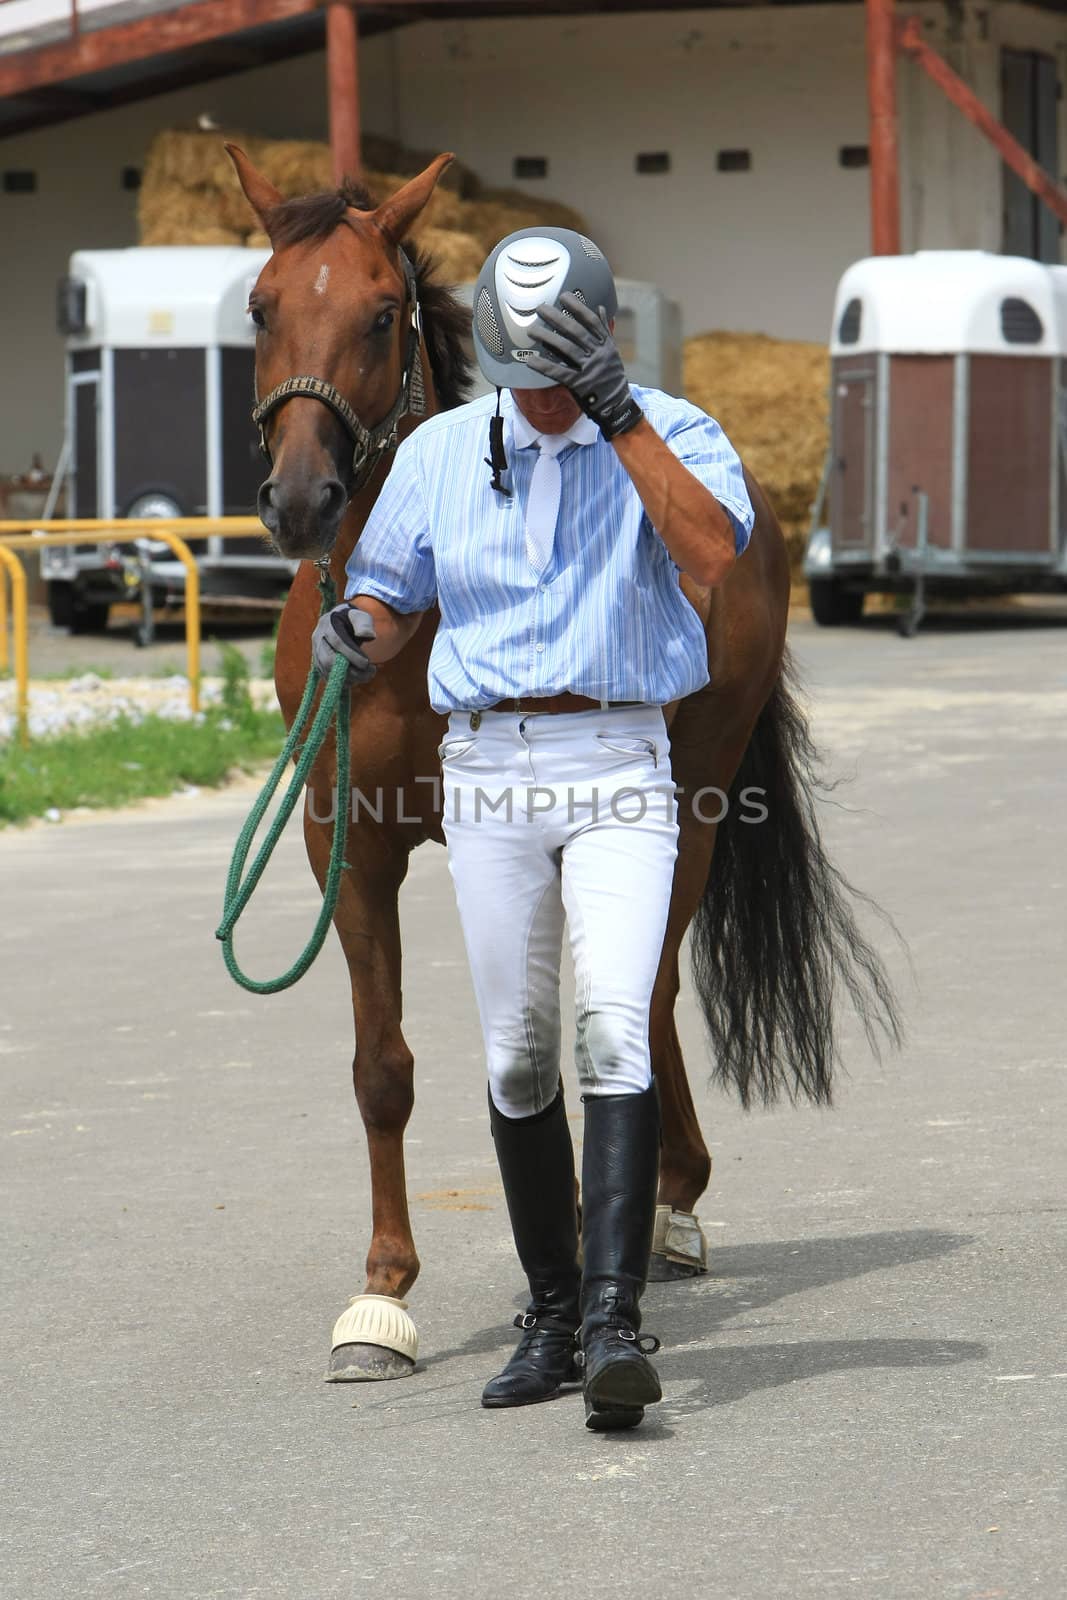  KYIV, UKRAINE - JULY 18:Jockey with him brown horse during a Open Equestrian Cup on July 18, 2008 in Kyiv, Ukraine